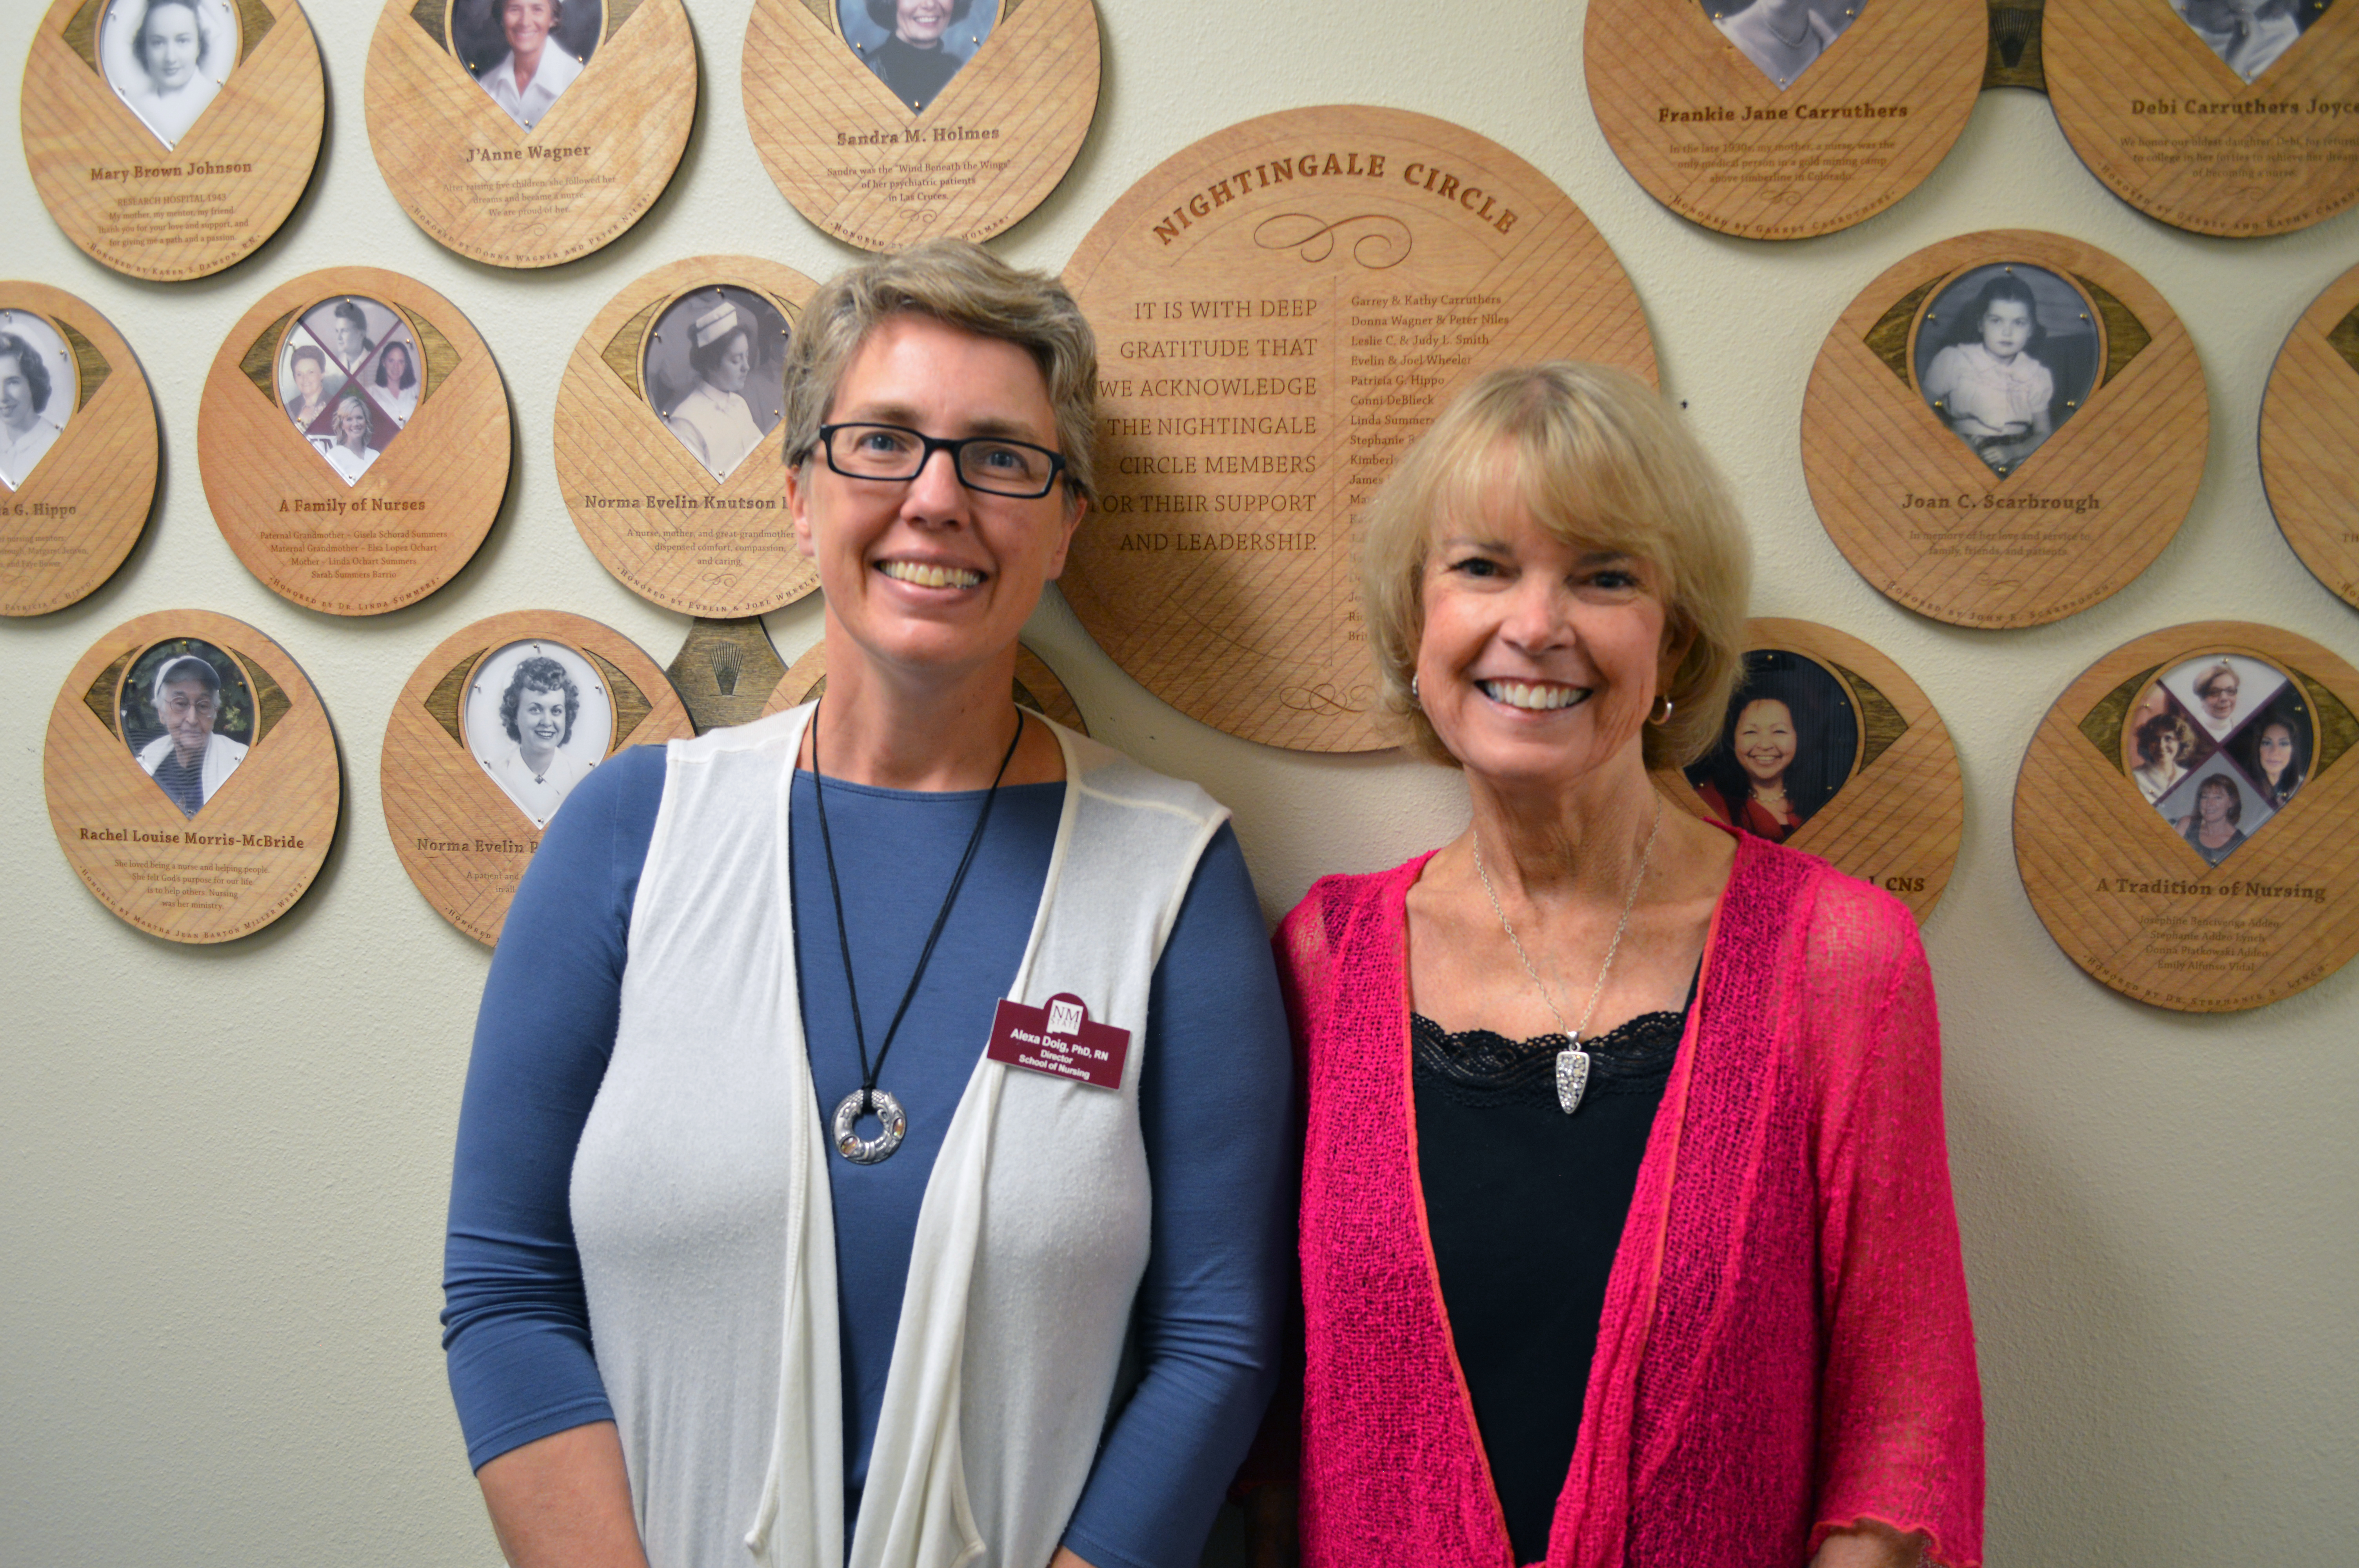 Karen Hand, a retired nursing professor who mentored and inspired hundreds of students during her 28-year career in the College of Health and Social Services at New Mexico State University, is the latest addition to the college’s Nursing Wall of Excellence.  Two women stand side-by-side. Karen Hand, a former nursing professor at New Mexico State University, right, stands next to Alexa Doig, the director of the School of Nursing, after the unveiling of Hand’s plaque on the Nursing Wall of Excellence in honor of her 45-year career and commitment to the nursing profession. (Courtesy photo) Hand, who has a Ph.D., joins a group of esteemed nurses who grace the Nursing Wall of Excellence in honor of their legacies and commitments to the nursing profession.   Hand has 45 years of nursing experience and comes from a family of health care professionals: her paternal grandfather and his four brothers were physicians; her mother and grandmother were nurses; her three brothers were medical professionals; and her four daughters started careers as a doctor, dentist, veterinarian and an ICU nurse.  “Nursing is the perfect combination of the humanities and sciences,” said Hand, who has bachelor’s and master’s degrees in nursing as well as a Ph.D. in nursing science. “I think it’s a privilege to care for people when they’re ill, dying or at life’s beginning.”  NMSU’s School of Nursing unveiled the Nursing Wall of Excellence in 2014. Based at the entrance to the Health and Social Services Building on the main campus, the wall features an audio and visual history of the School of Nursing, as well as a special collection of plaques with names and photos of honored nurses. Funds used to add a nurse to the wall support scholarships for NMSU nursing students.   “We are always pleased to honor our retired faculty members with the special recognition of a plaque on the Nursing Donor Wall. Involving one of our donors in this process makes it all the more meaningful,” said Tina Byford, interim vice president of University Advancement.   In her professional career, Hand served as an intensive care nurse, cardiovascular nurse specialist, health care administrator and nursing professor at NMSU. She also served for many years on the New Mexico Board of Nursing’s Education Advisory Committee and the National Council of State Boards of Nursing.  Hand came to NMSU in 1985 to serve as a clinical instructor in the School of Nursing. She retired from the university in 2017 after having taught hundreds of nursing students. Two years before her retirement, she earned a Ph.D. in nursing science from NMSU.  “The NMSU School of Nursing has such a long history of excellence. NMSU is known as an excellent university, and the School of Nursing, especially, is known to be excellent,” she said. “We know that because the hospitals in our community and other partners in the community will tell us that our graduates are very well prepared to begin their nursing careers.”  While teaching at NMSU, Hand most enjoyed supervising nursing students at hospitals and overseeing their approach to patient care, she said.  “When you take students into the hospital that seems to be where nursing knowledge is really integrated,” she said. “It synthesizes everything they’ve learned about the sciences and humanities. And, when it comes together and they see a disease a in their patient, they never forget it.”  Hand’s appointment to the Nursing Wall of Excellence came as a surprise to her. Over the summer, she learned that an anonymous person from the College of Health and Social Services had donated funds on her behalf to add her name and picture to the wall. She attended the plaque-hanging ceremony in August.  “I’m honored and I’m so humbled,” she said.  For more information, or to purchase a plaque, contact the CHSS Development Office at 575-646-5061.